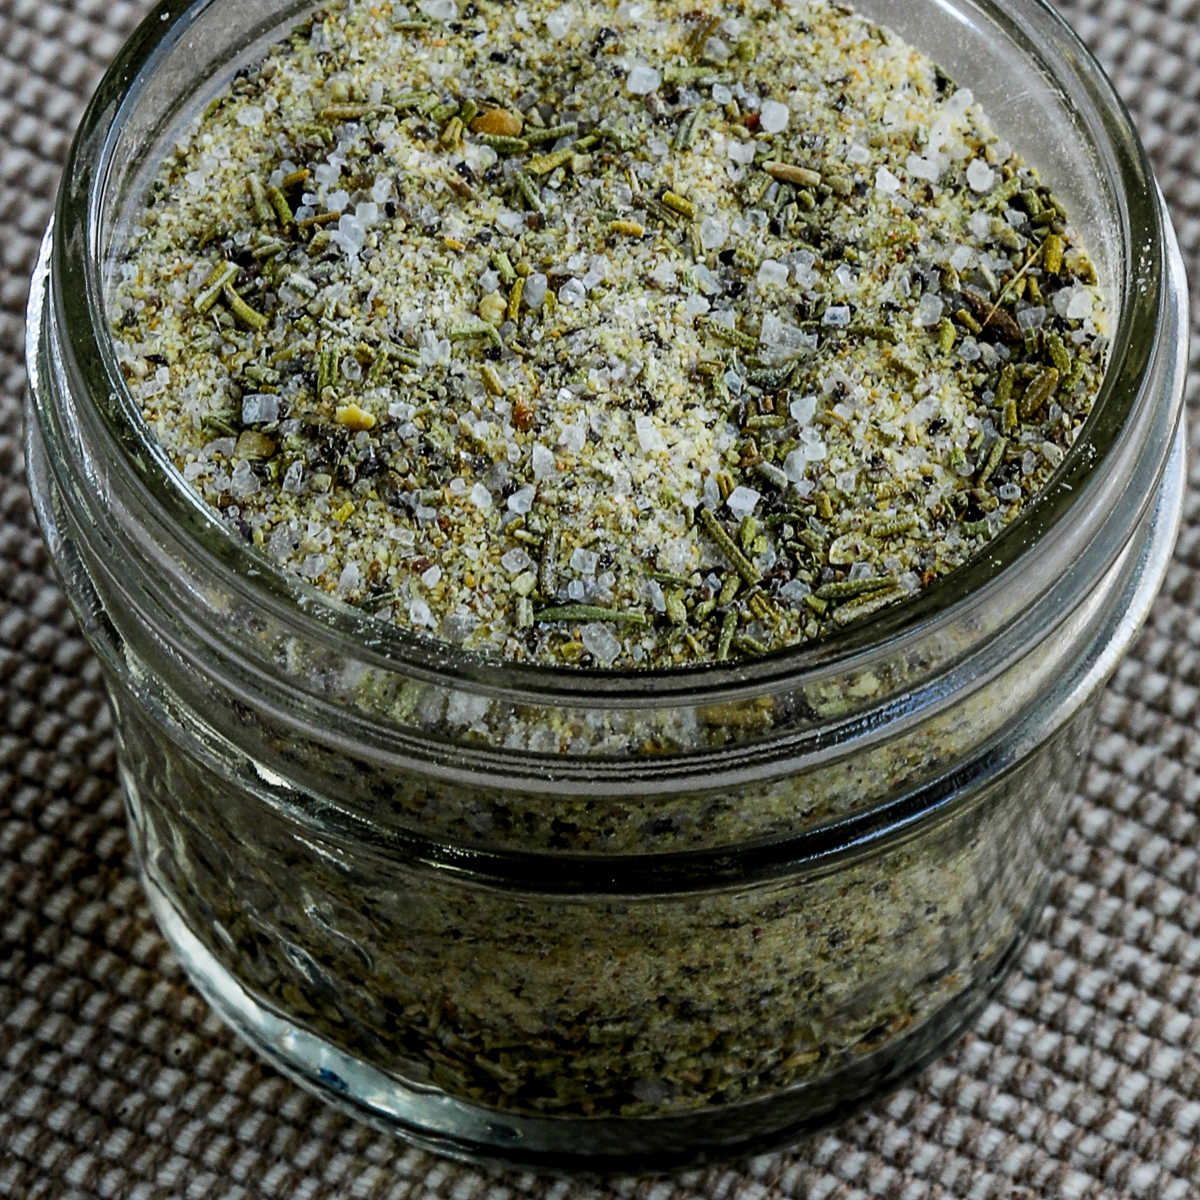 Square image for Rosemary Garlic Seasoning shown in open glass jar.